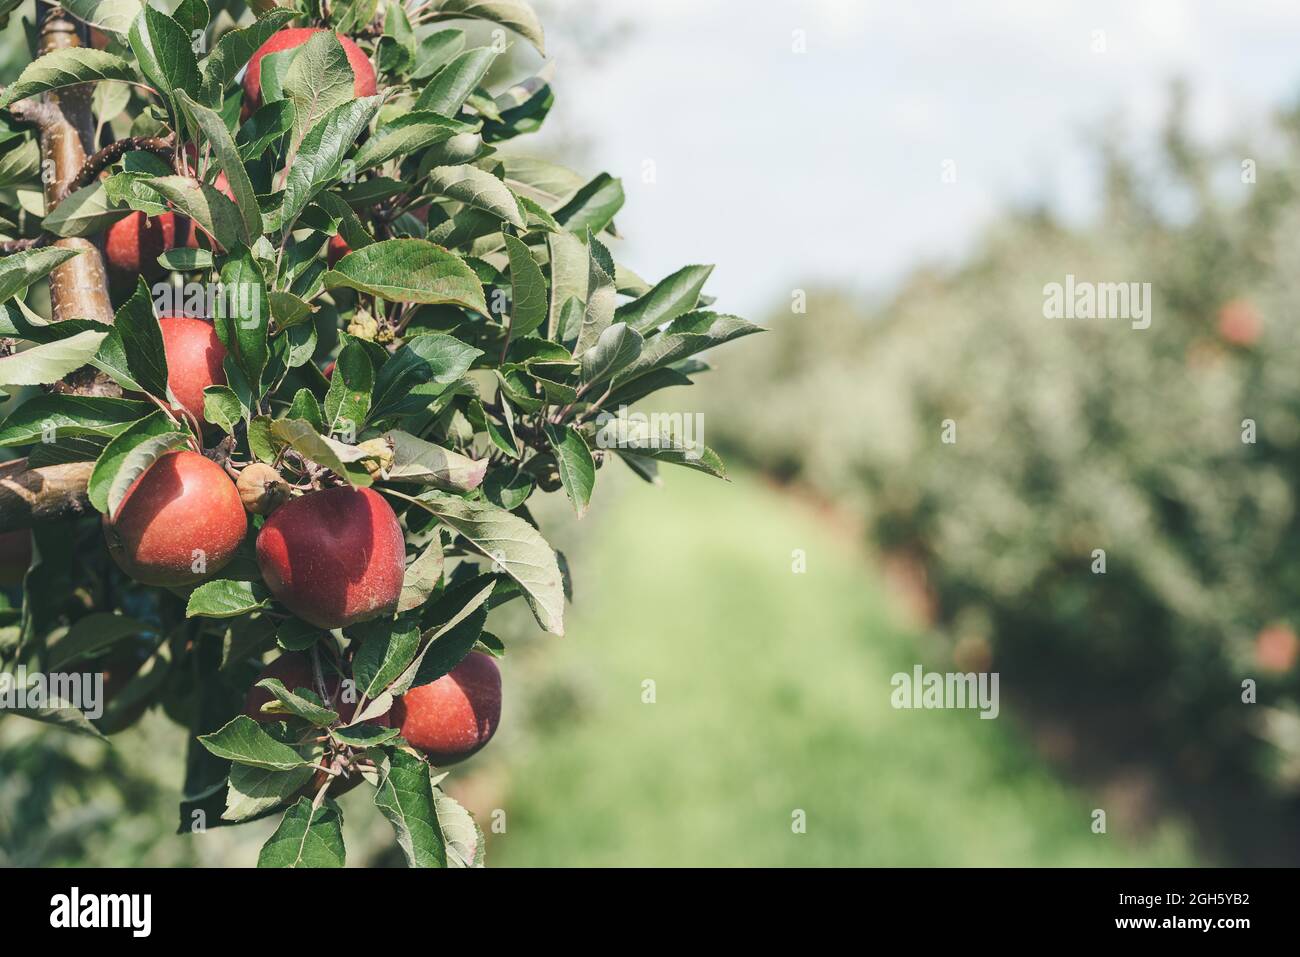 close-up of ripe red apples on tree at apple orchard Stock Photo